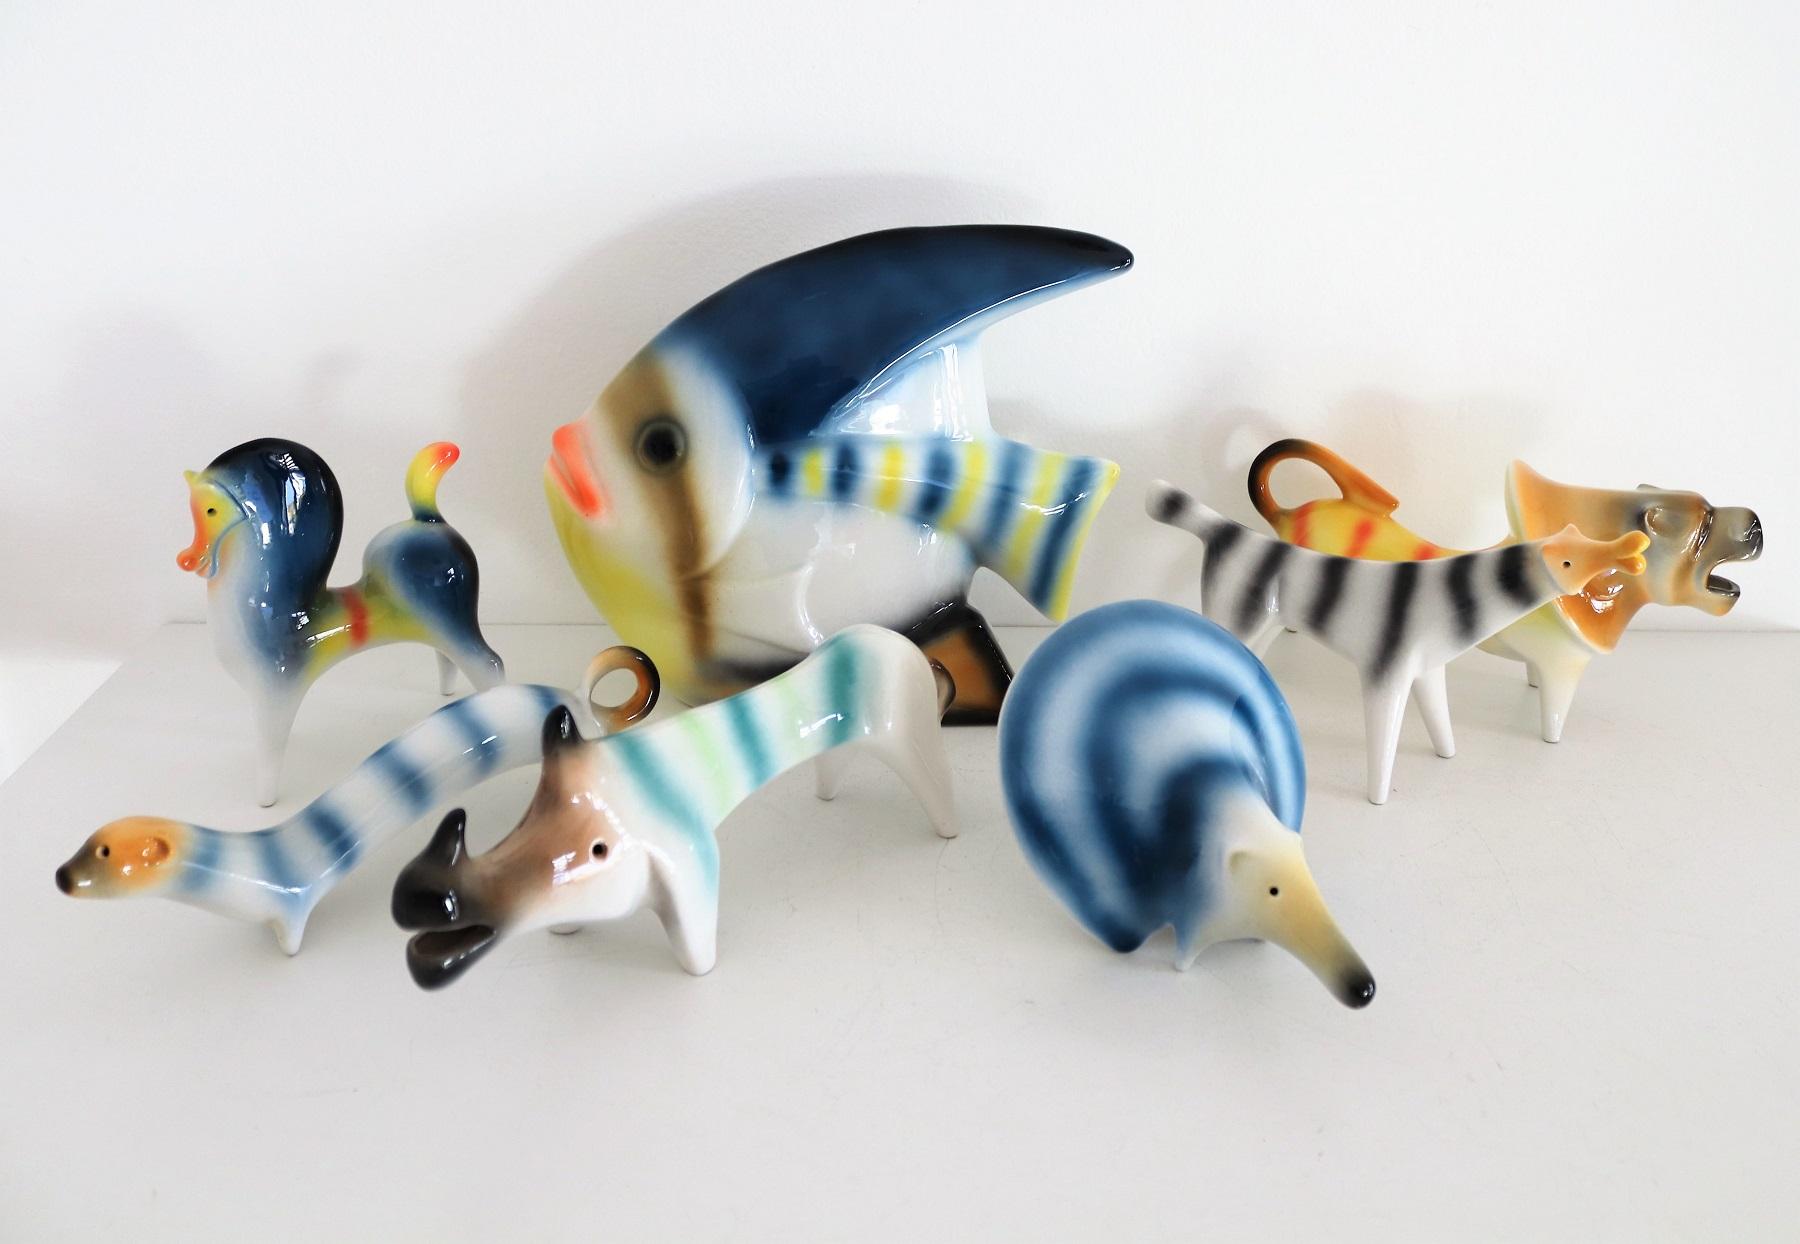 Beautiful and colorful selection of art animals made in ceramic material, Italy 1970s.
Made by Roberto Rigon, each animal is signed with RR under the ceramic.
The big fish can be used as a flower vase.
The set is composed by the following